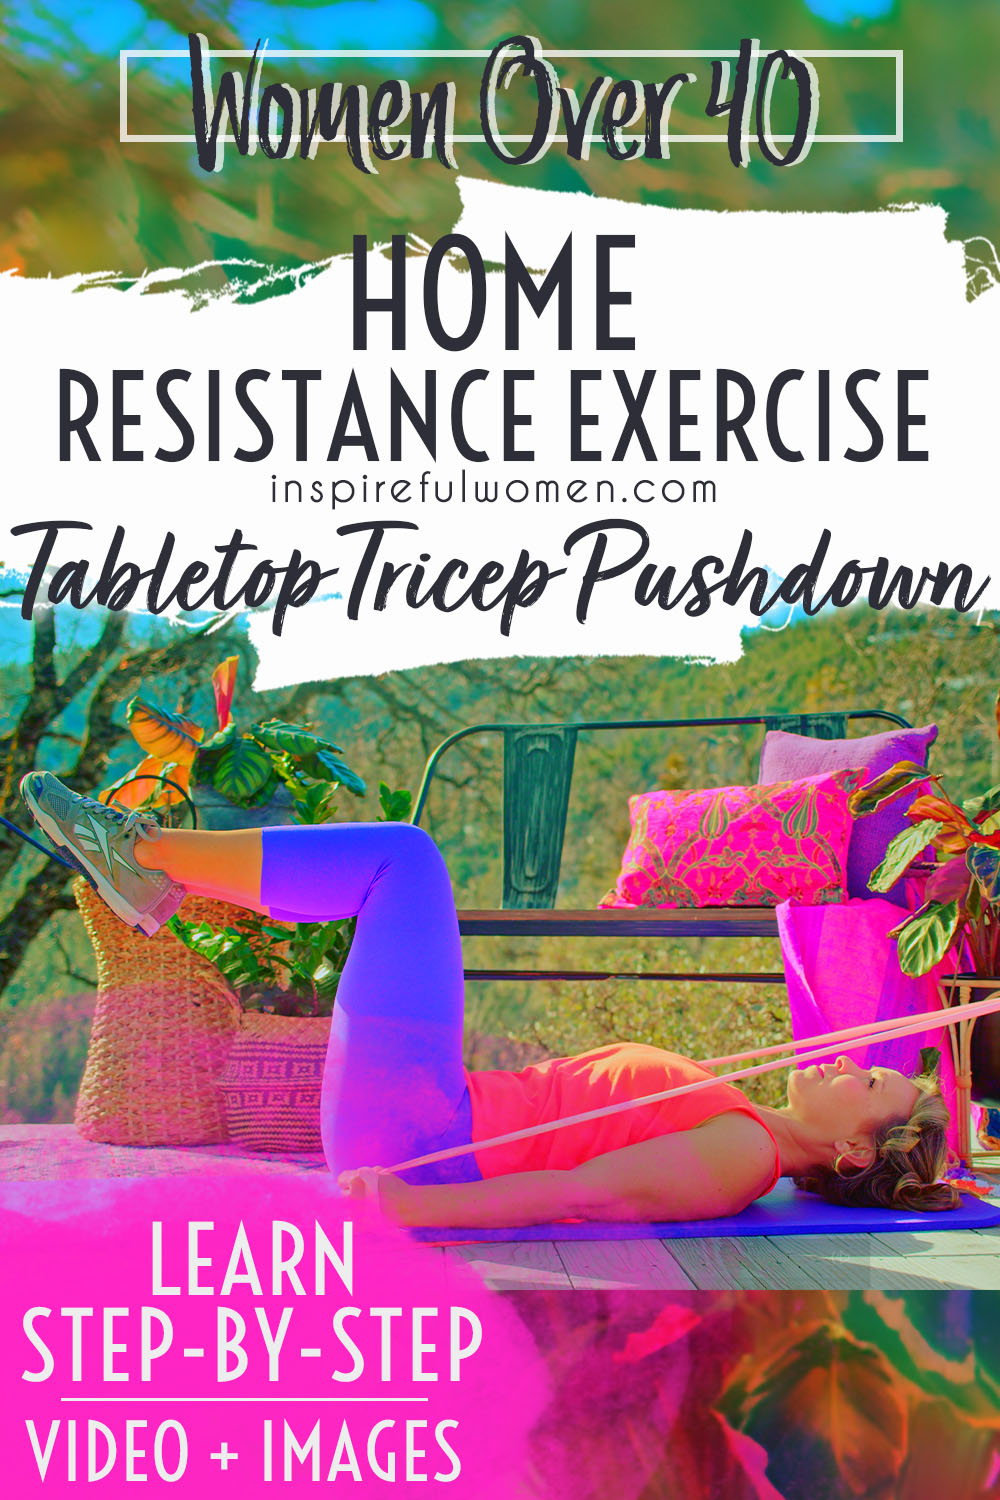 tabletop-supine-resistance-band-tricep-pushdown-variation-arm-flab-exercise-women-over-40